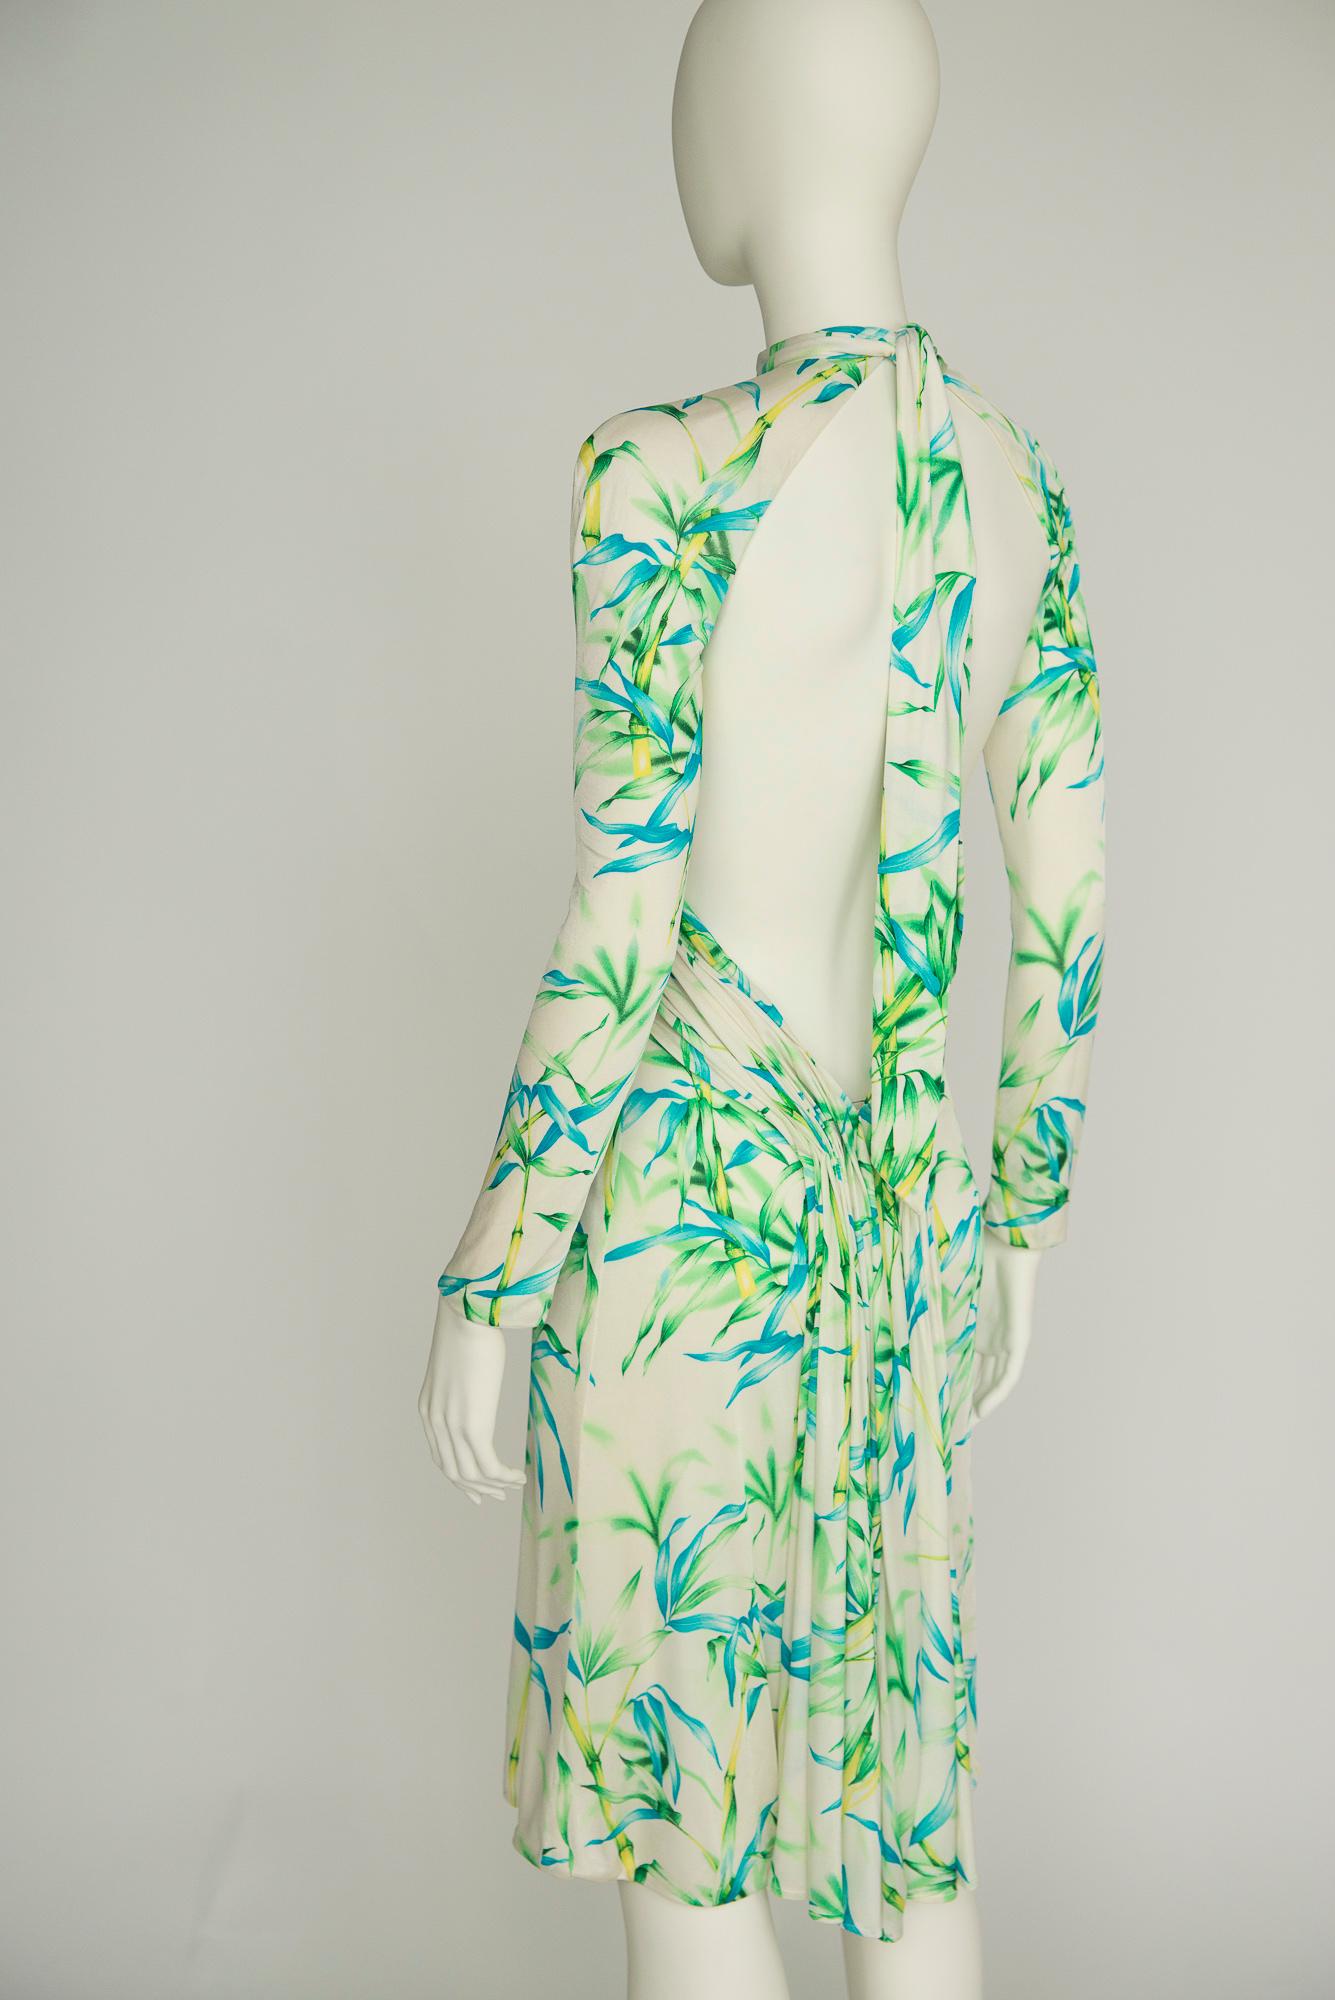 Gianni Versace Couture Open-Back Tropical Print Runway Silk Jersey Dress, SS2000 For Sale 9